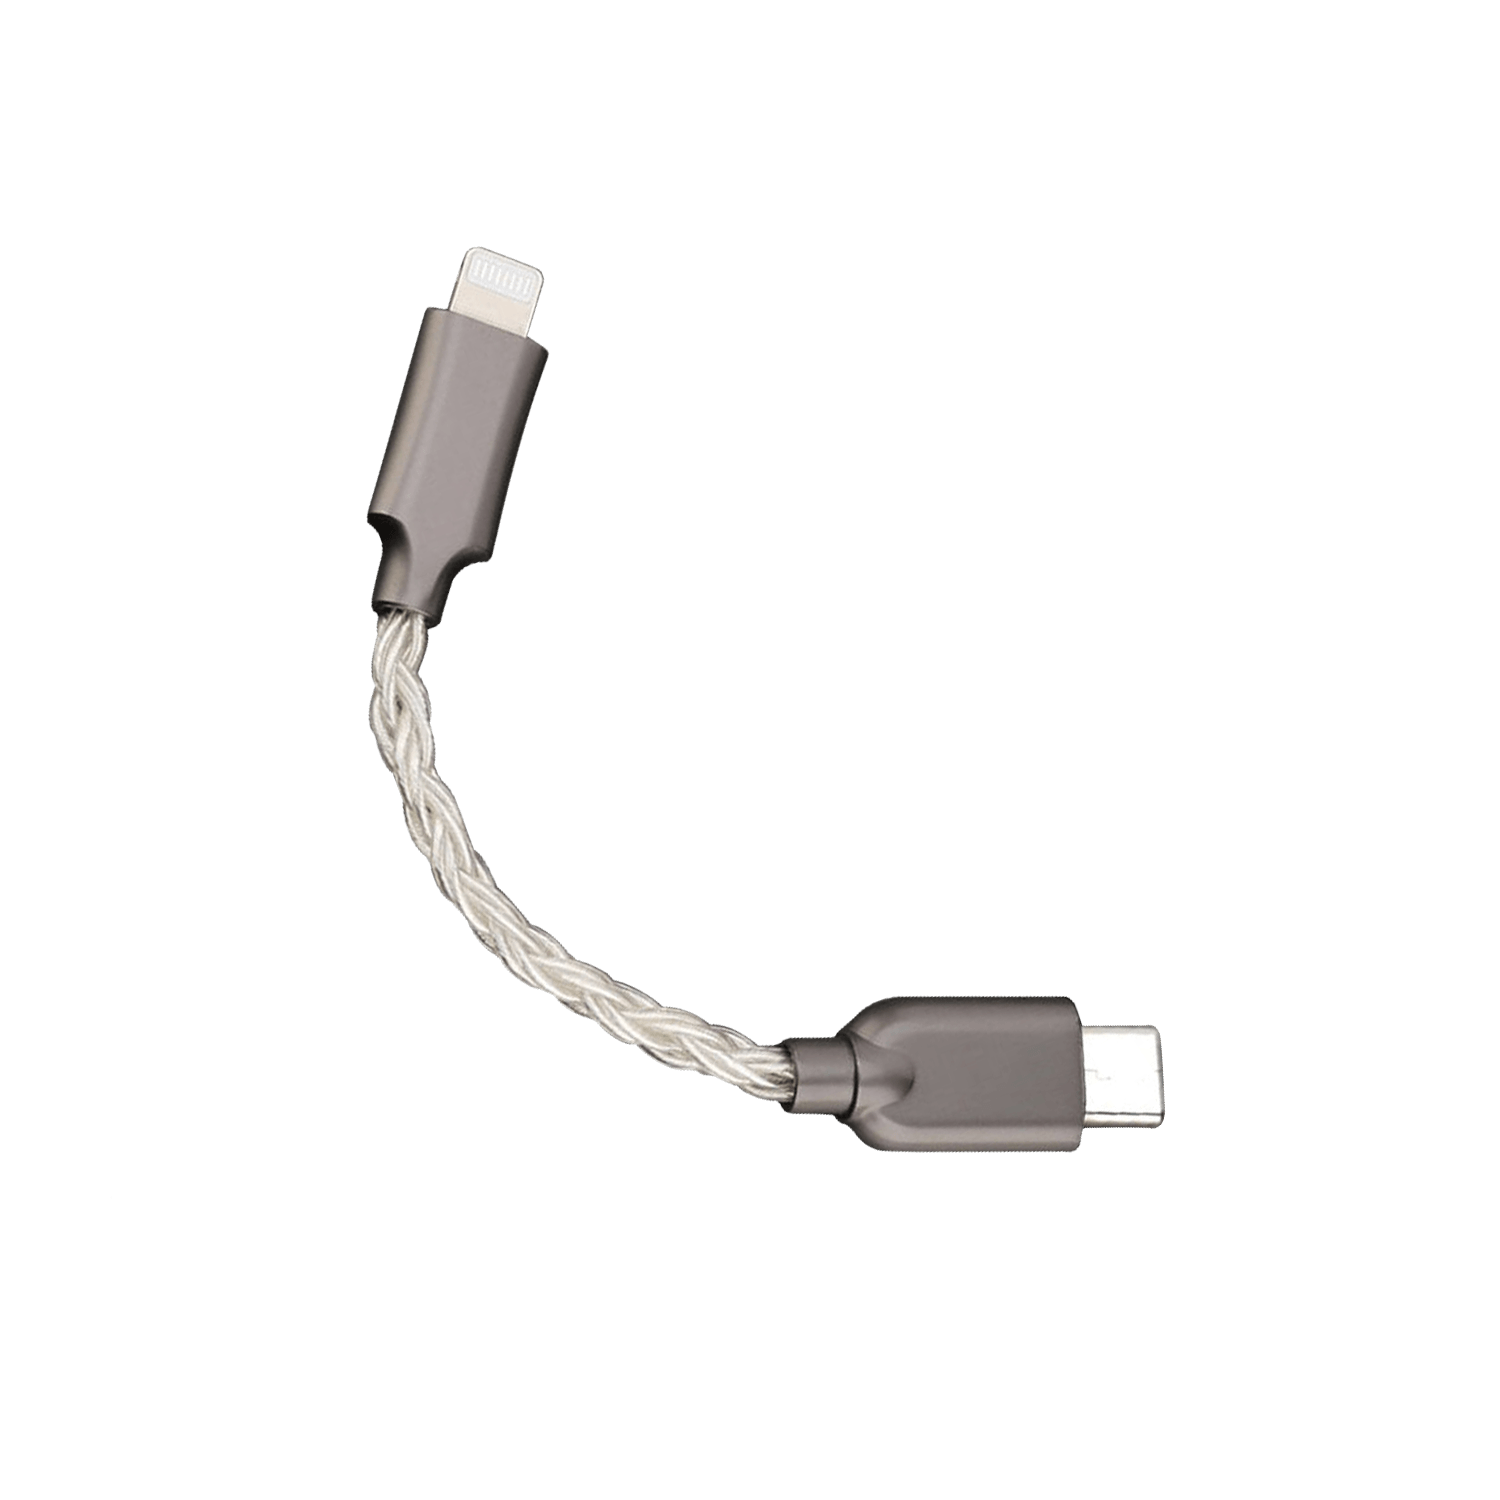 Hidizs LT01 Lightning to Type-C Transfer Cable